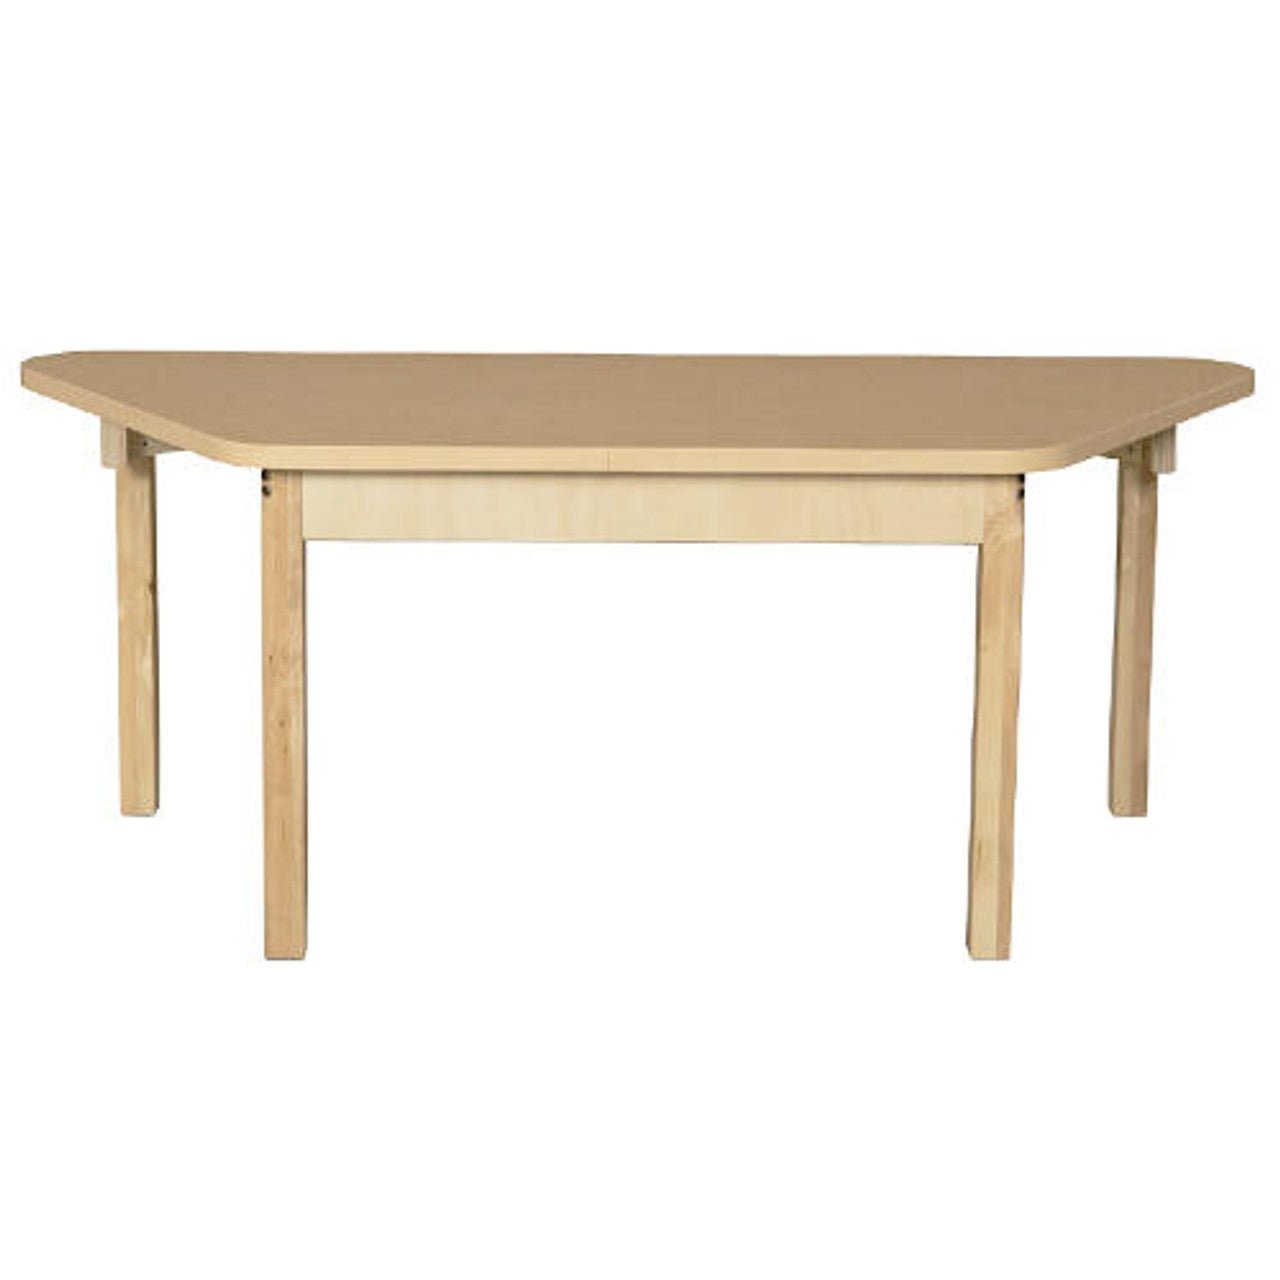 Trapezoidal High Pressure Laminate Table with Hardwood Legs- 24"